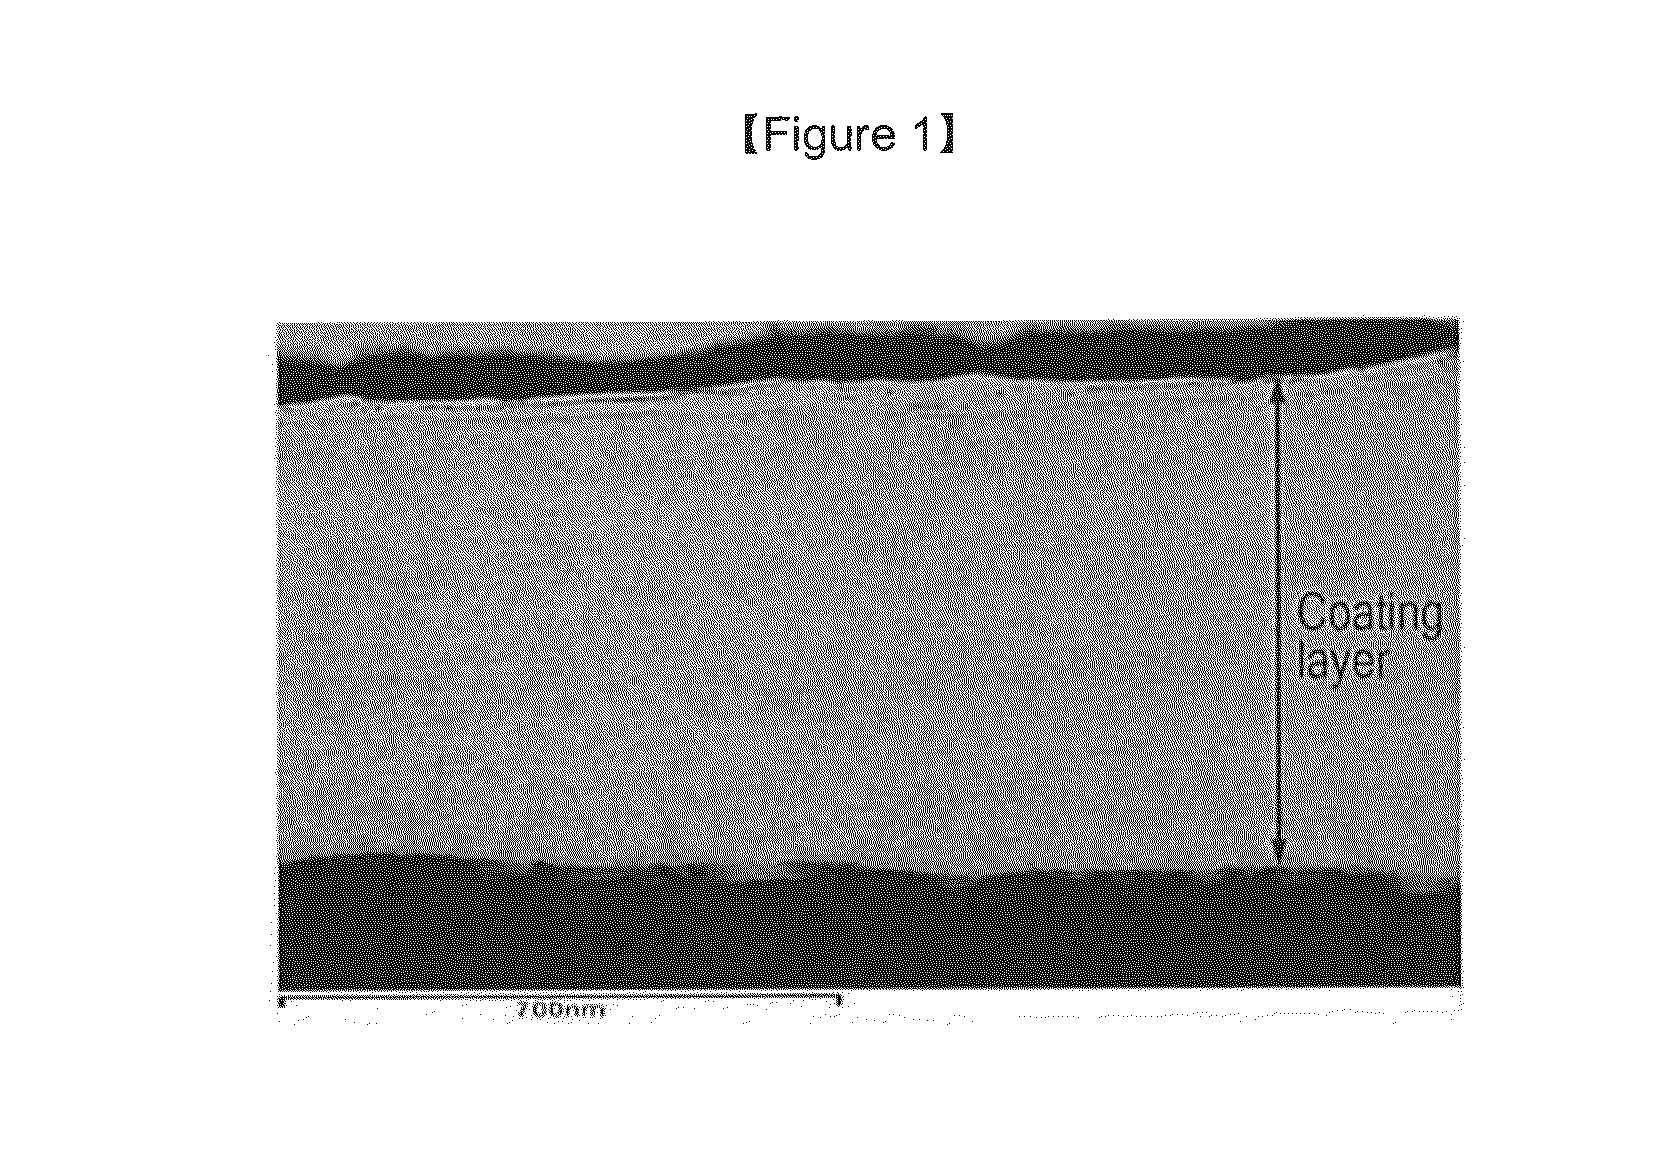 Insulation coating composition for non-oriented electrical sheet, method for manufacturing the same, and non-oriented electrical sheet to which insulation coating composition is applied